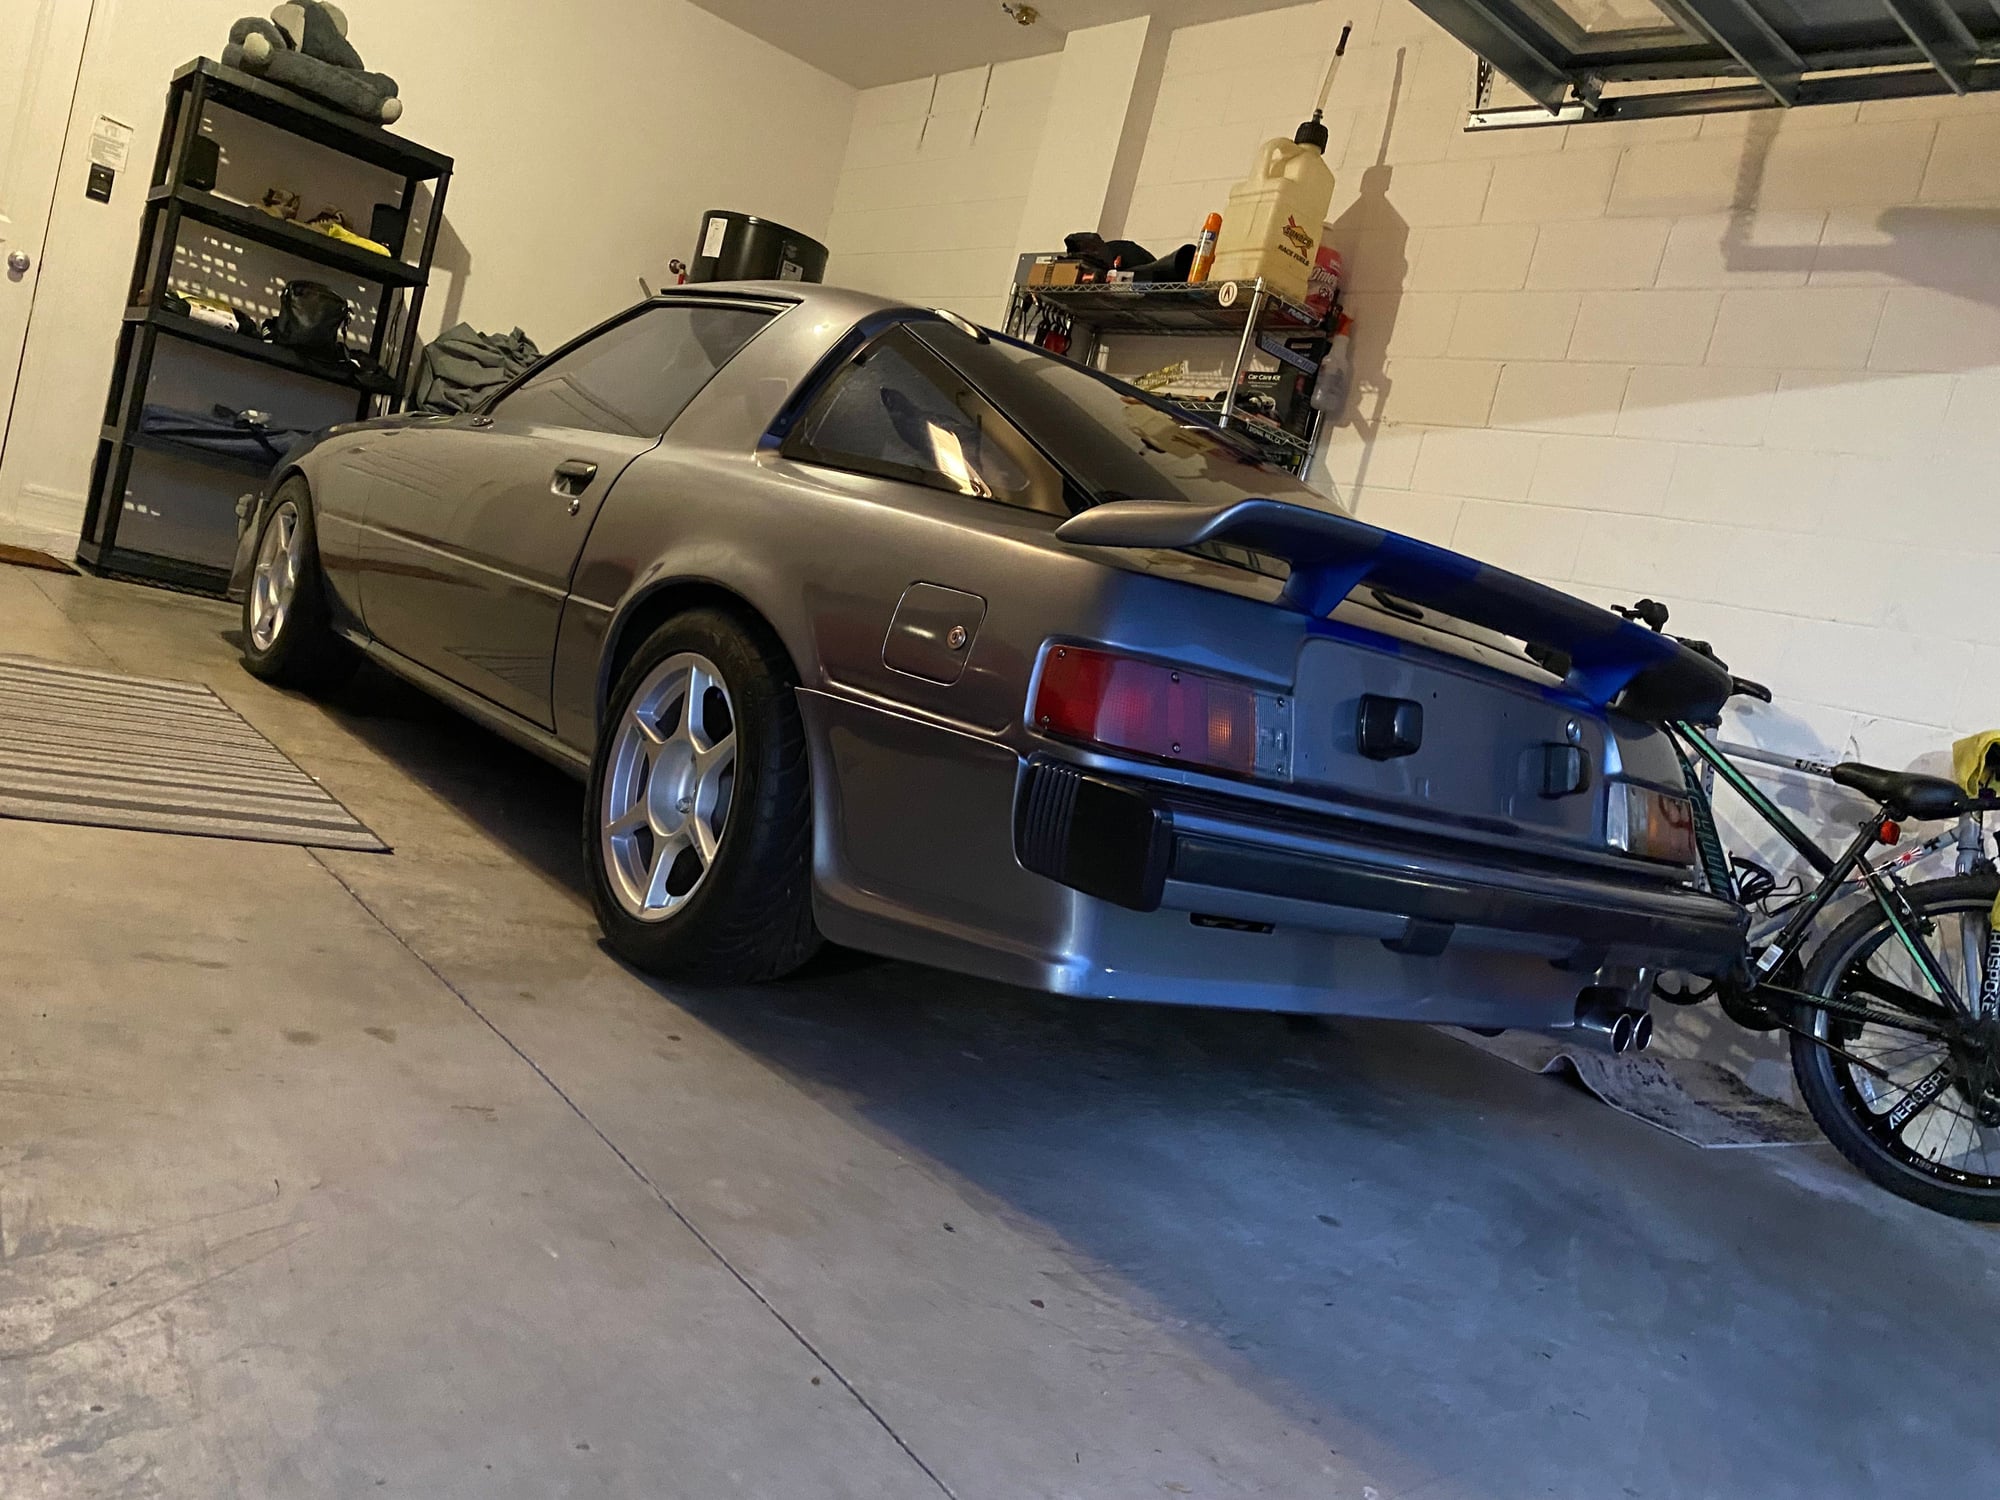 1979 Mazda RX-7 - 36yr -Family-Owned Modified Mariah Motorsports MODE 4 1979 Mazda RX-7 5-Speed - Used - VIN SA22C516898 - 32,146 Miles - Other - 2WD - Manual - Coupe - Gray - Winter Springs, FL 32708, United States